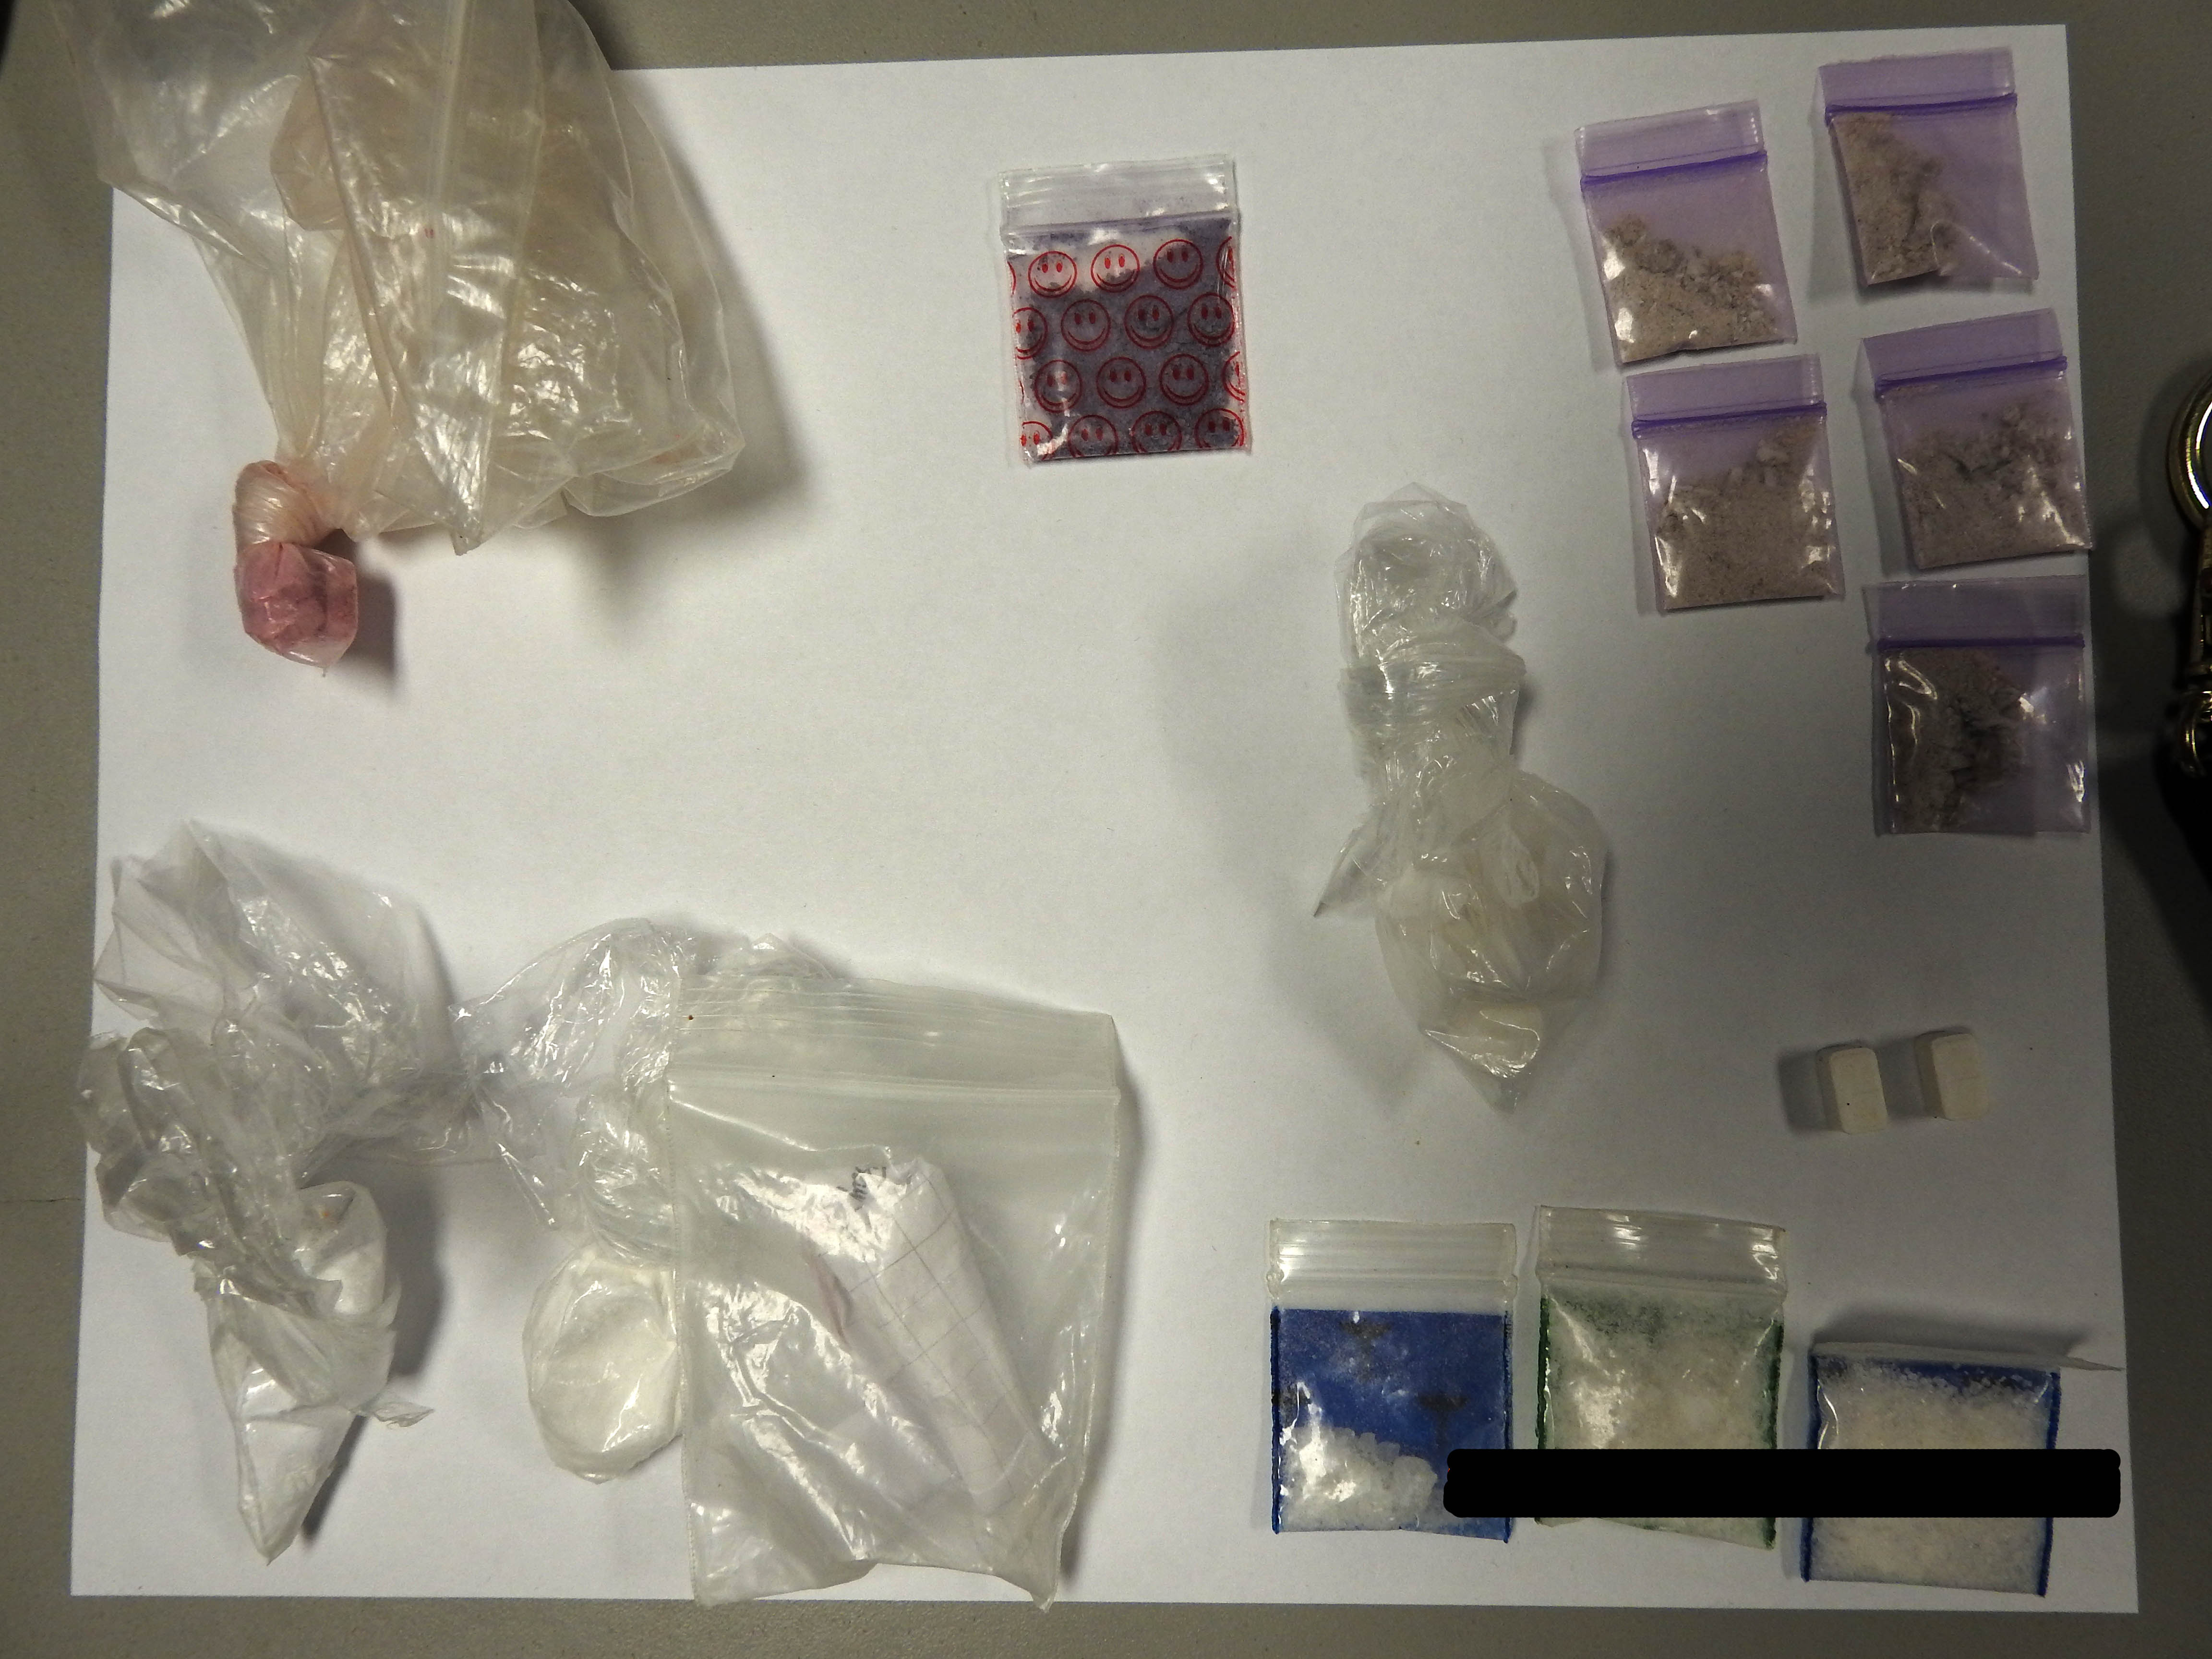 Two Southern Ontario males arrested amid drug trafficking investigation